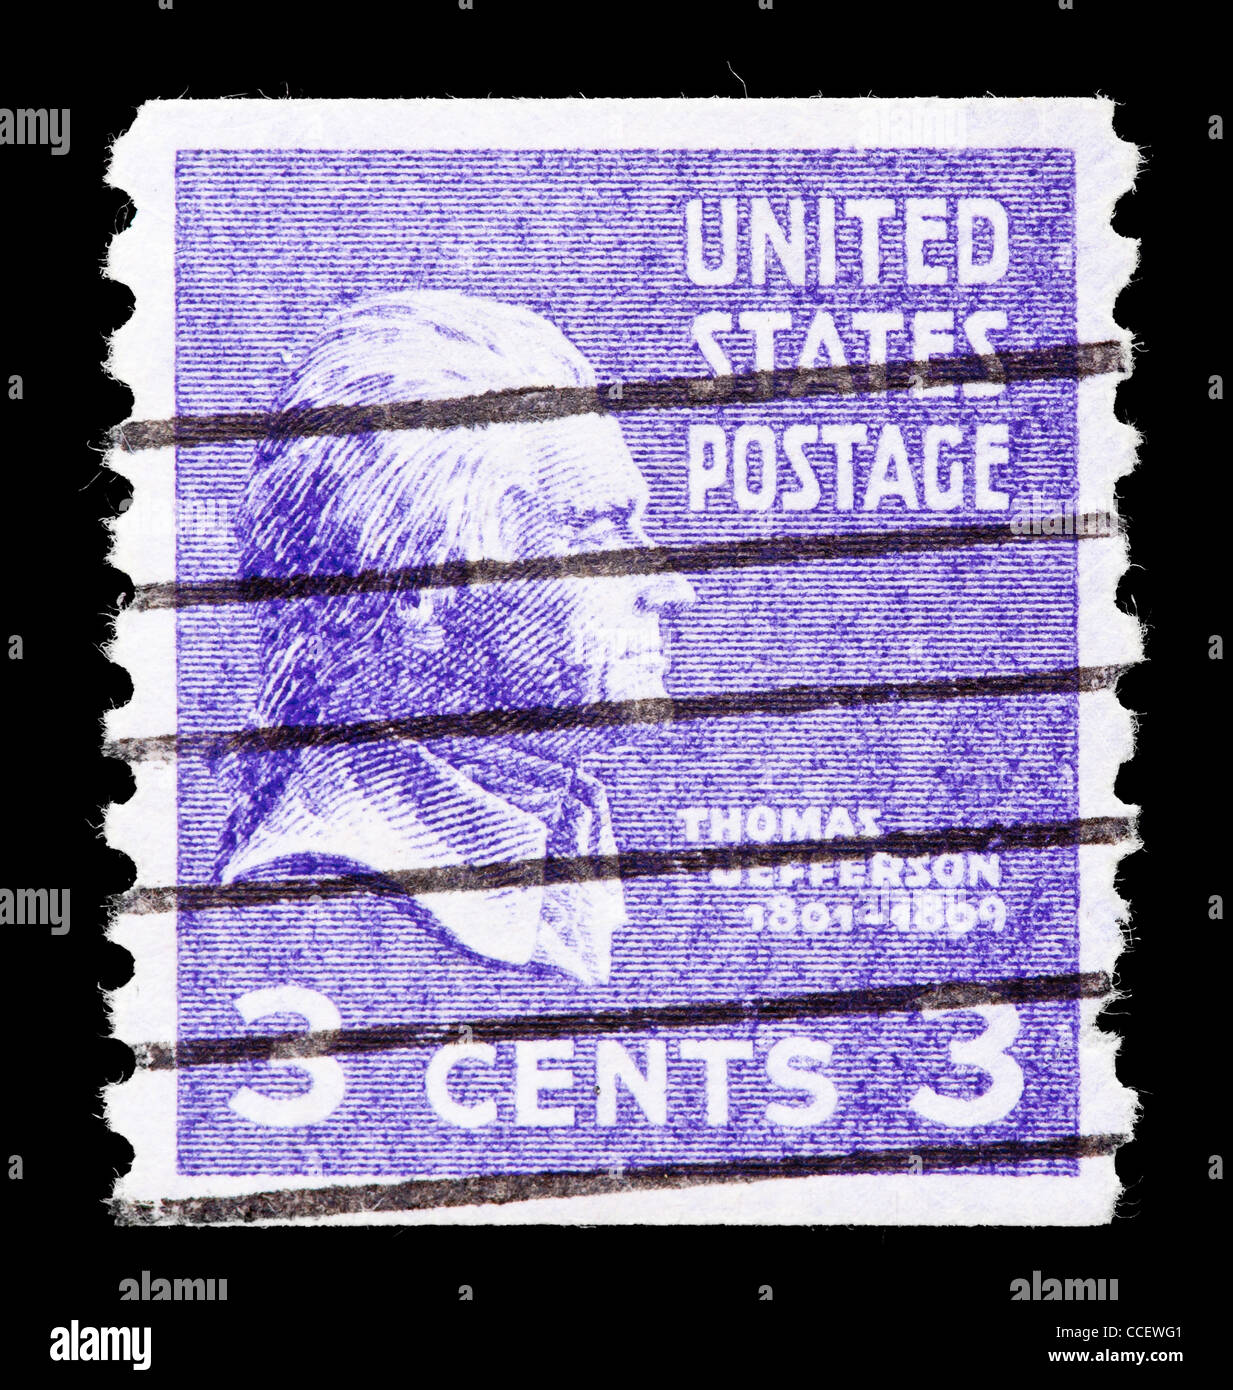 Postage stamp: United States Postage, Thomas Jefferson, 3 cent, 1938, stamped, perforated vertically Stock Photo